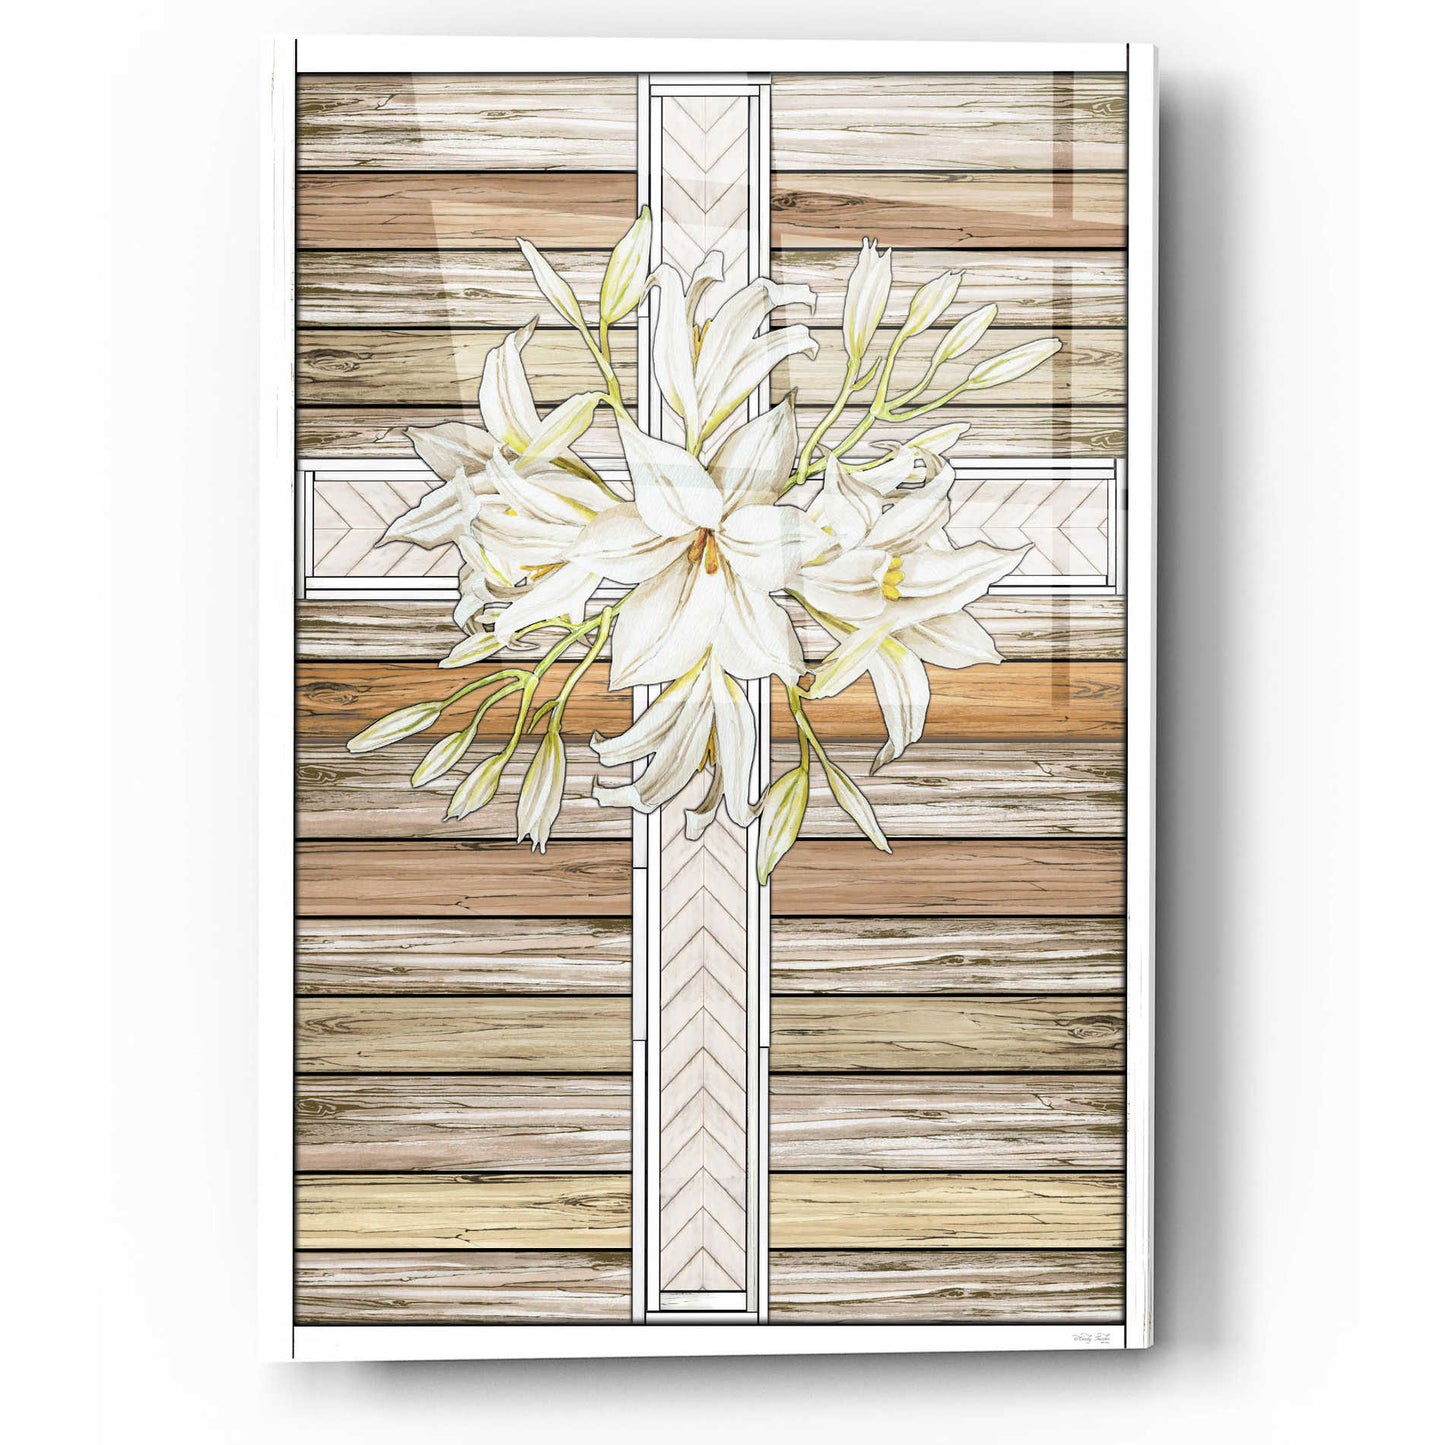 Epic Art 'Floral Cross' by Cindy Jacobs, Acrylic Glass Wall Art,12x16